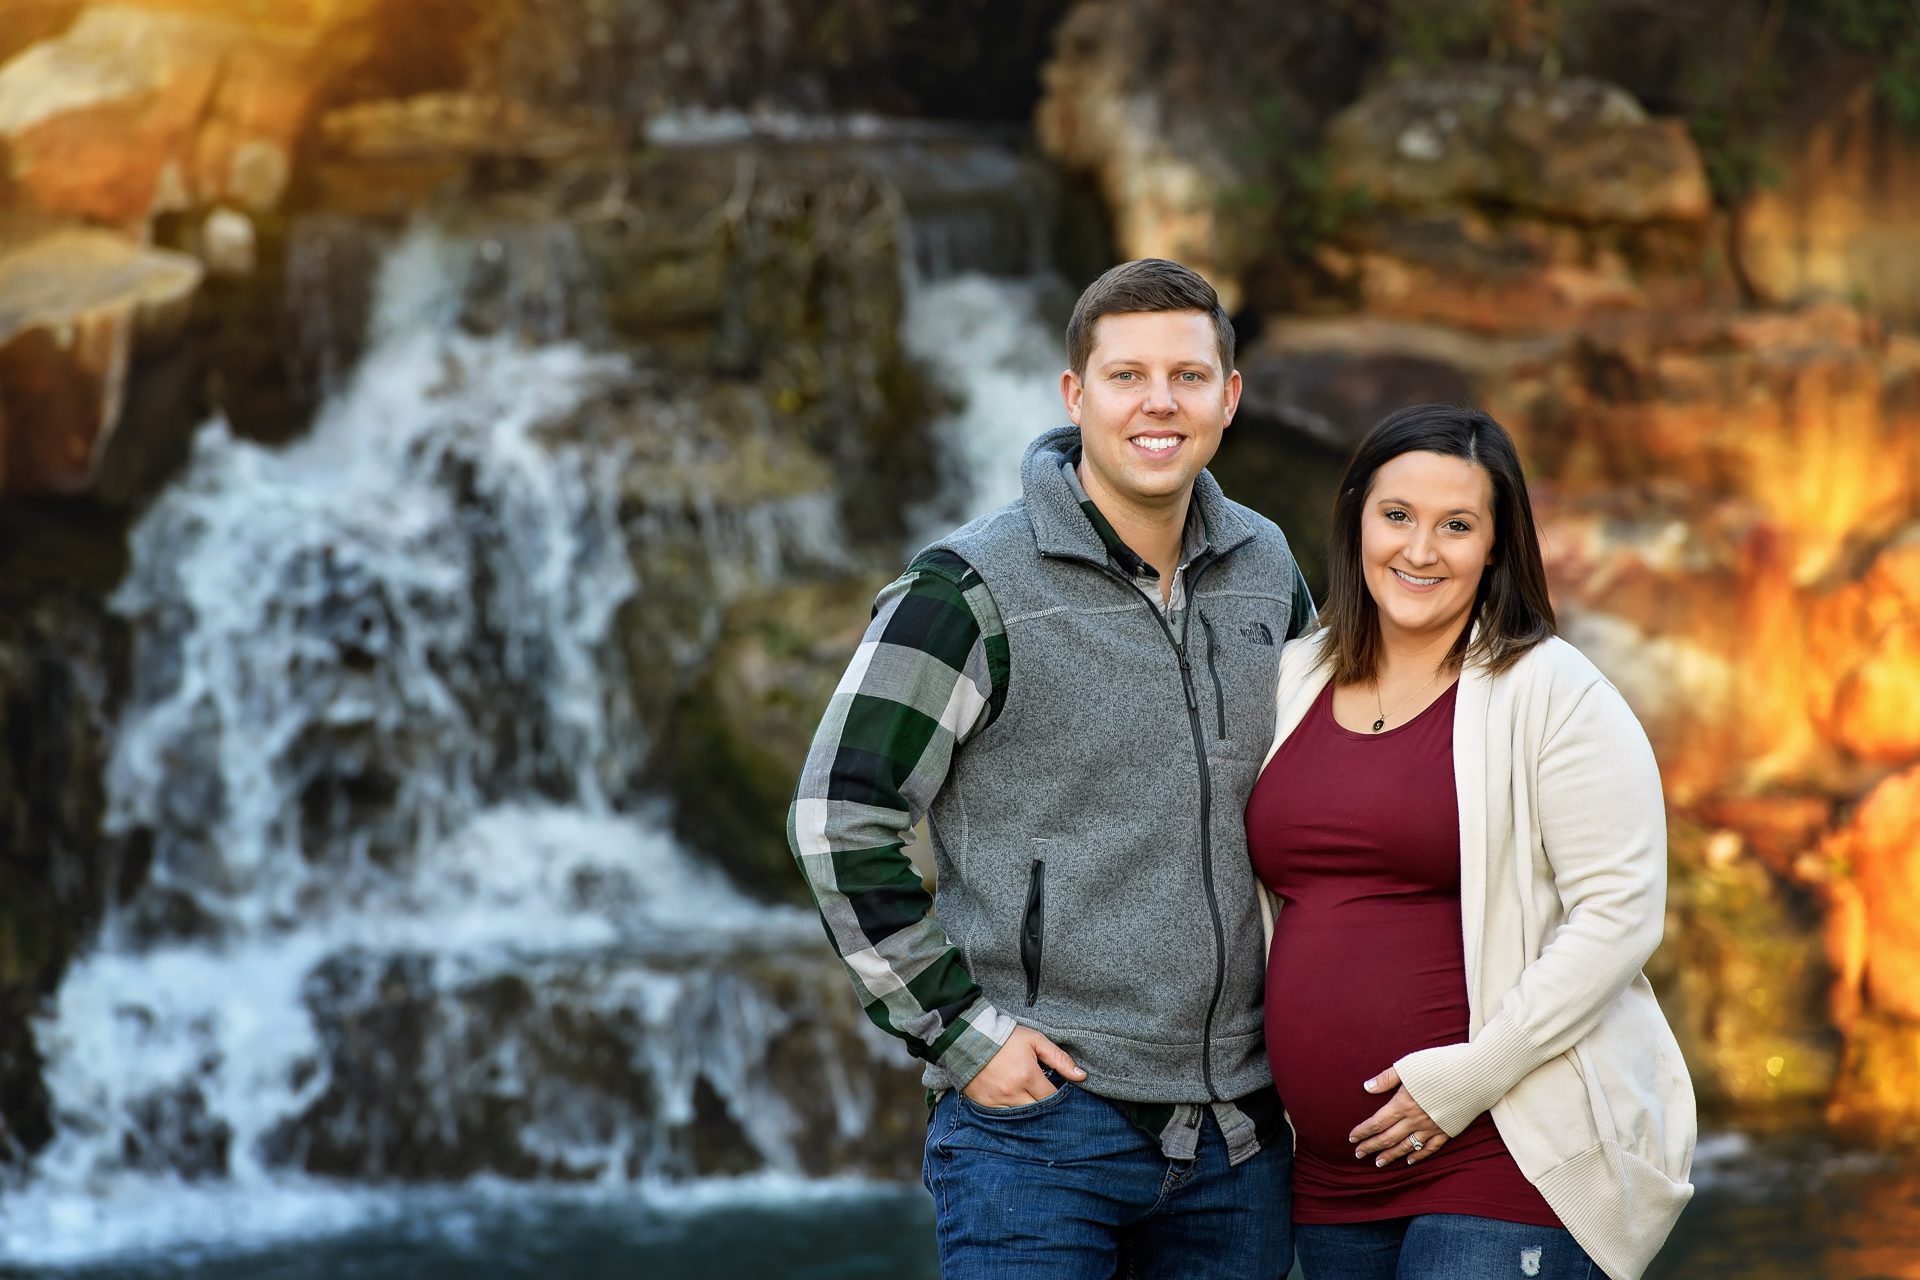 Natalie Roberson maternity photography